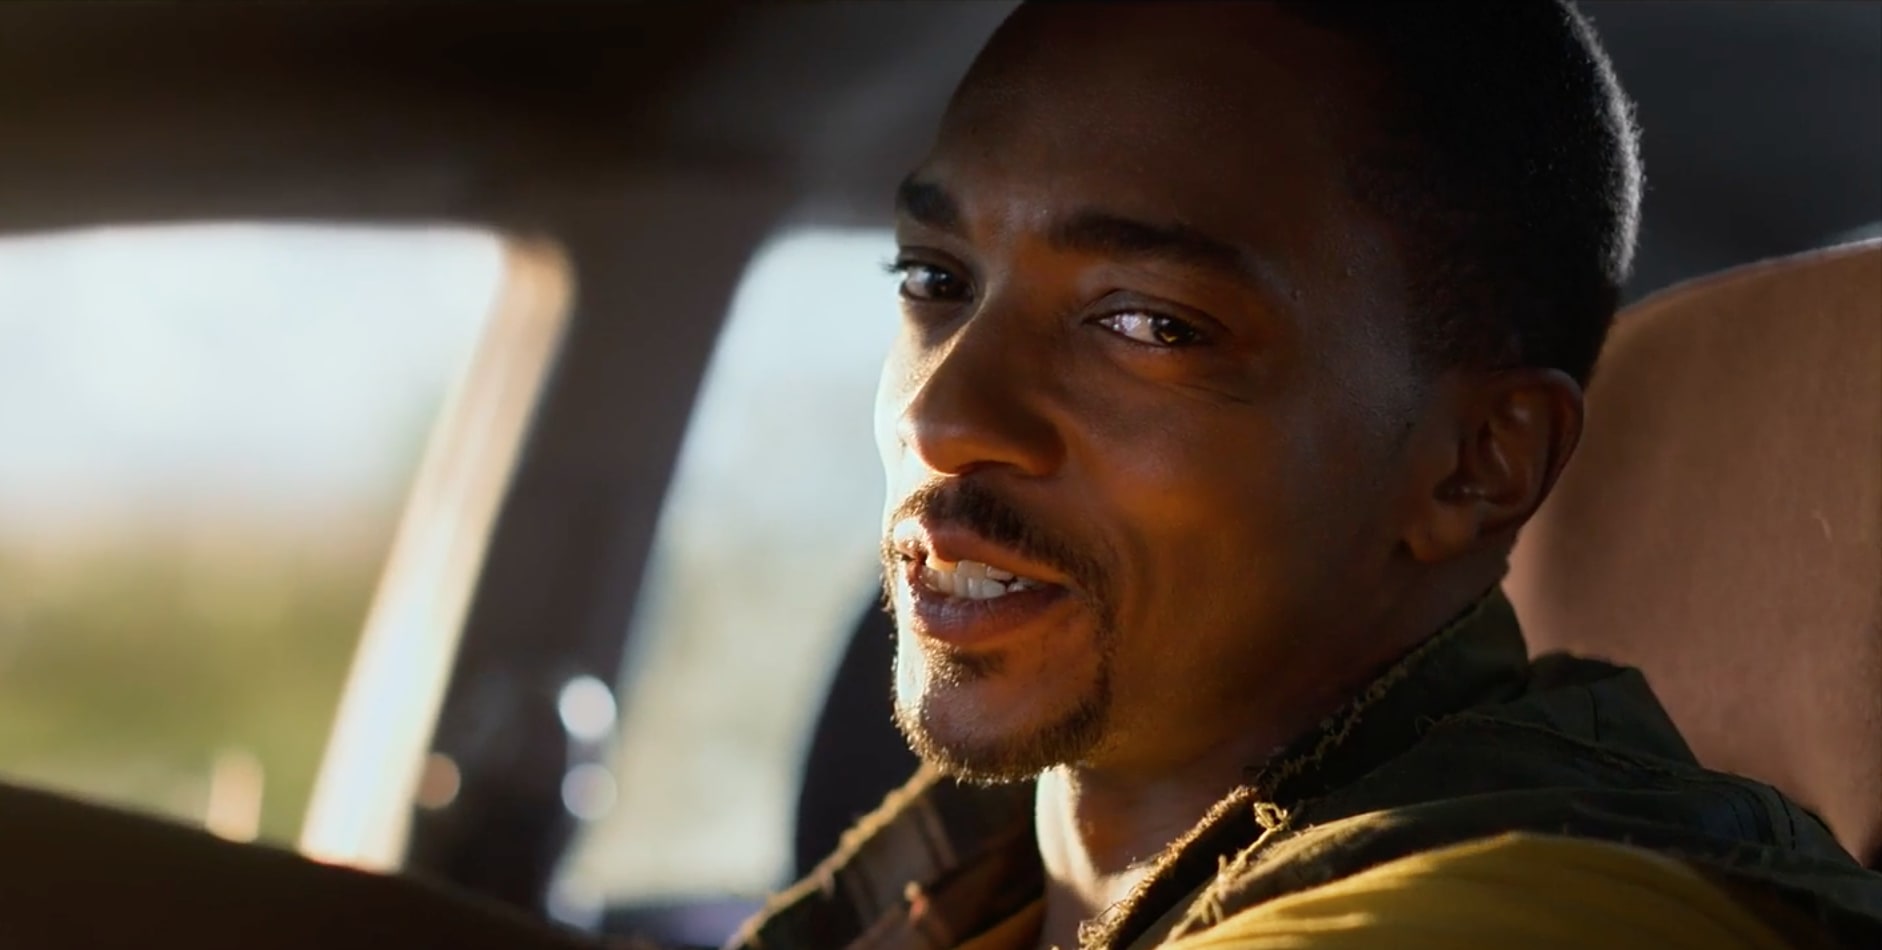 ‘Twisted Metal’ Teaser: Anthony Mackie Faces Vehicular Homicide In A Post-Apocalyptic Wasteland